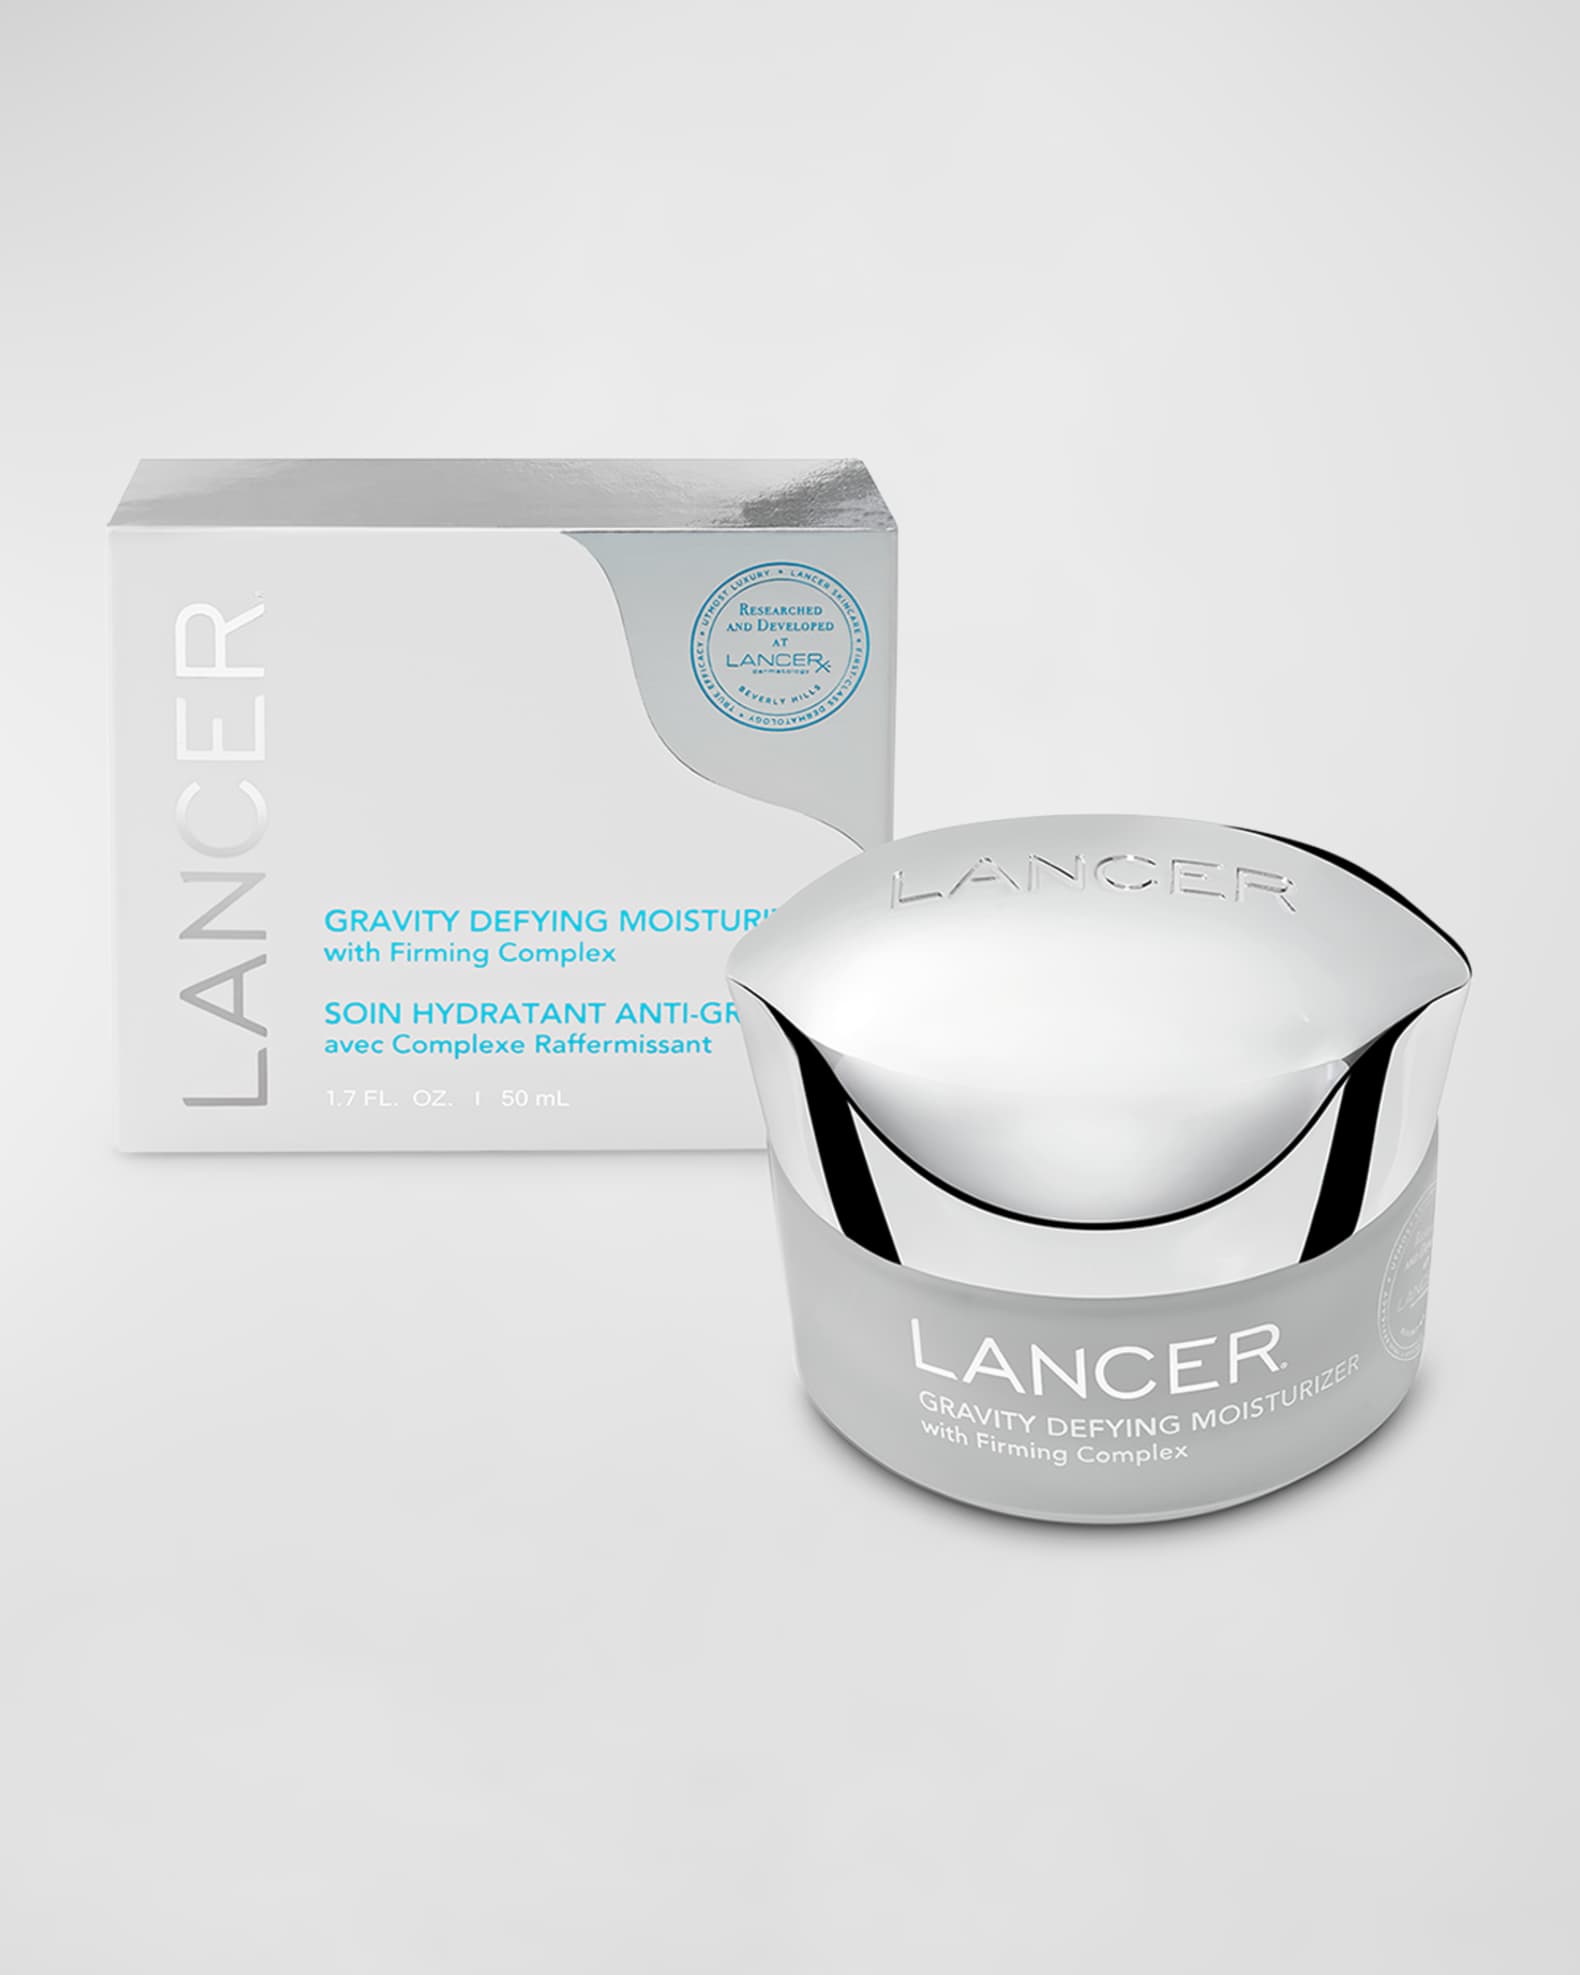 Gravity Defying Moisturizer with Firming Complex